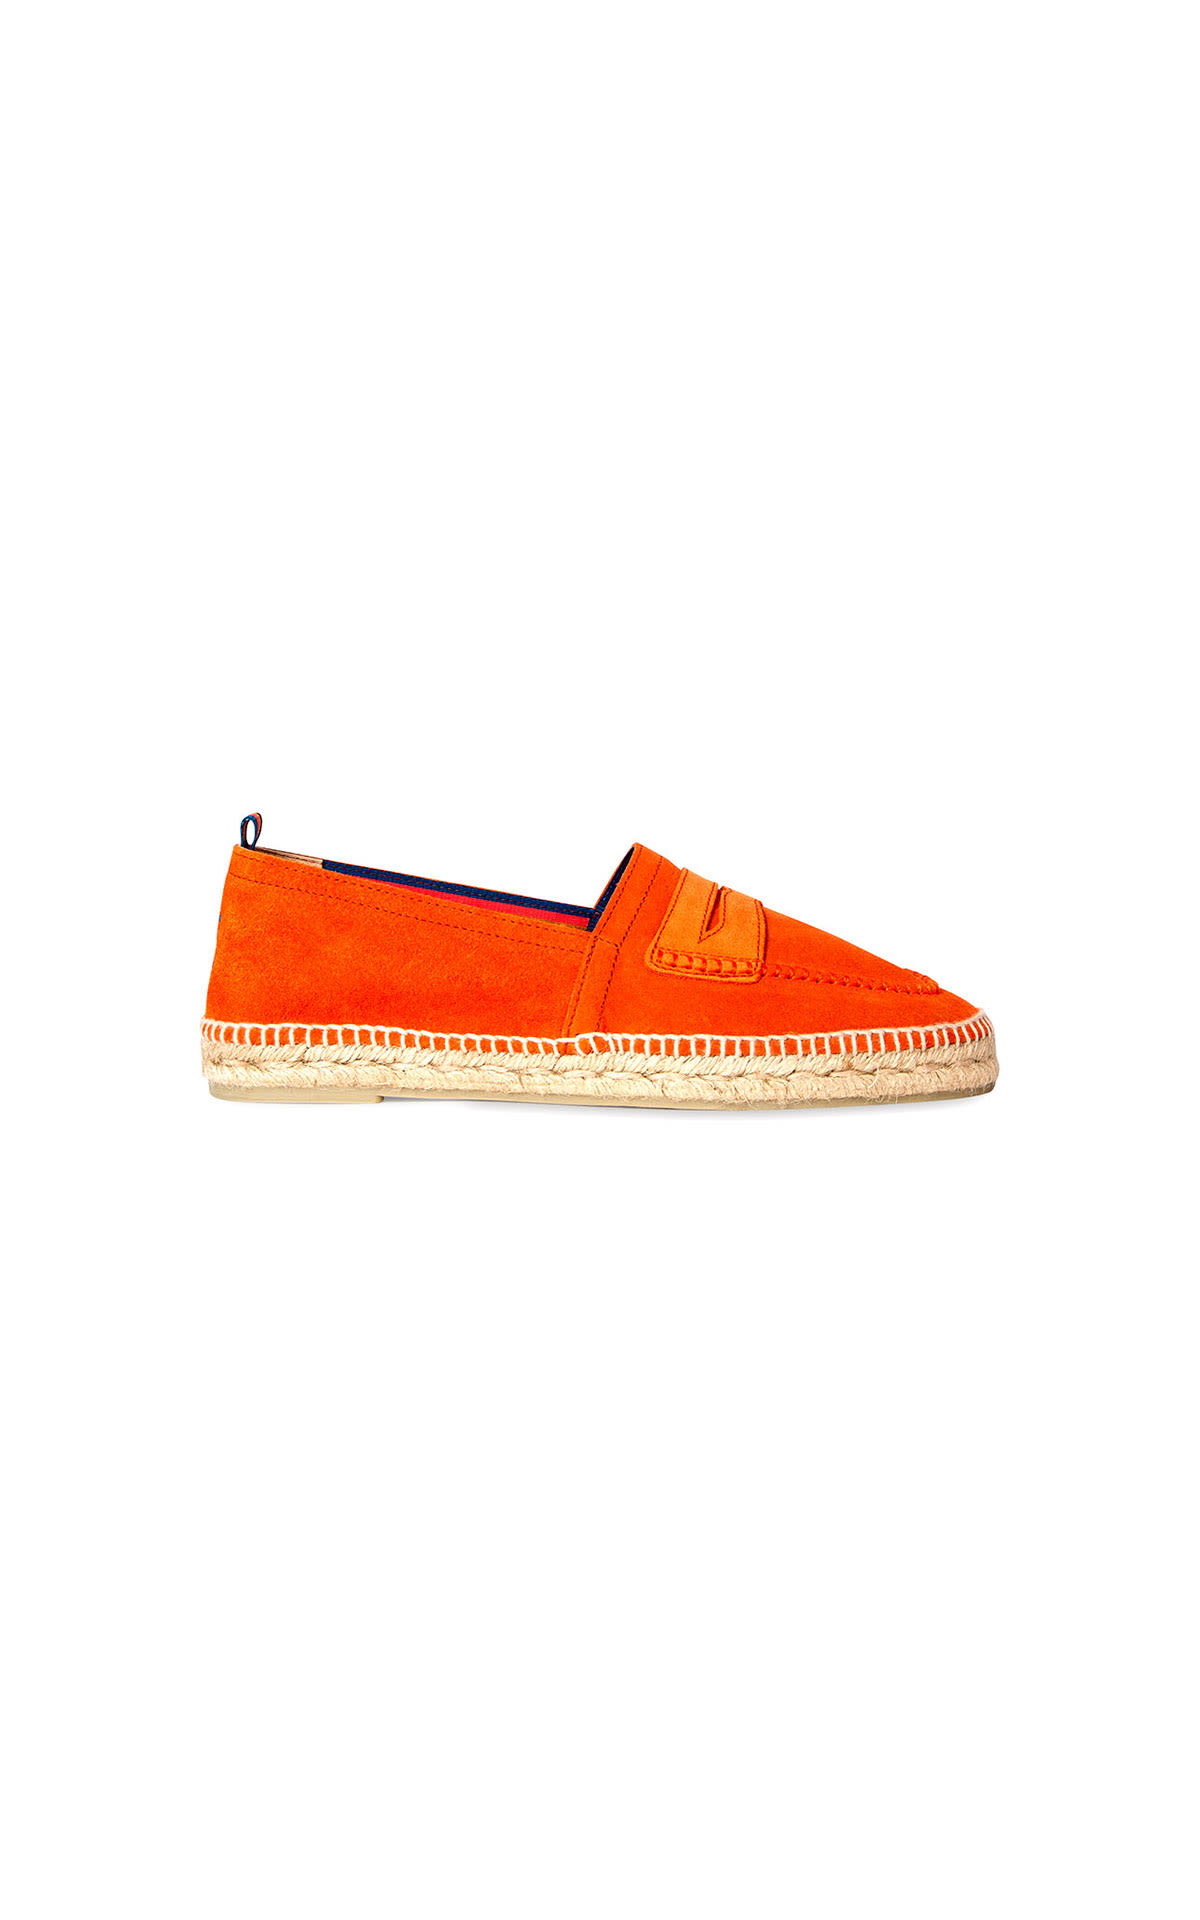 Paul Smith Suede espadrille from Bicester Village